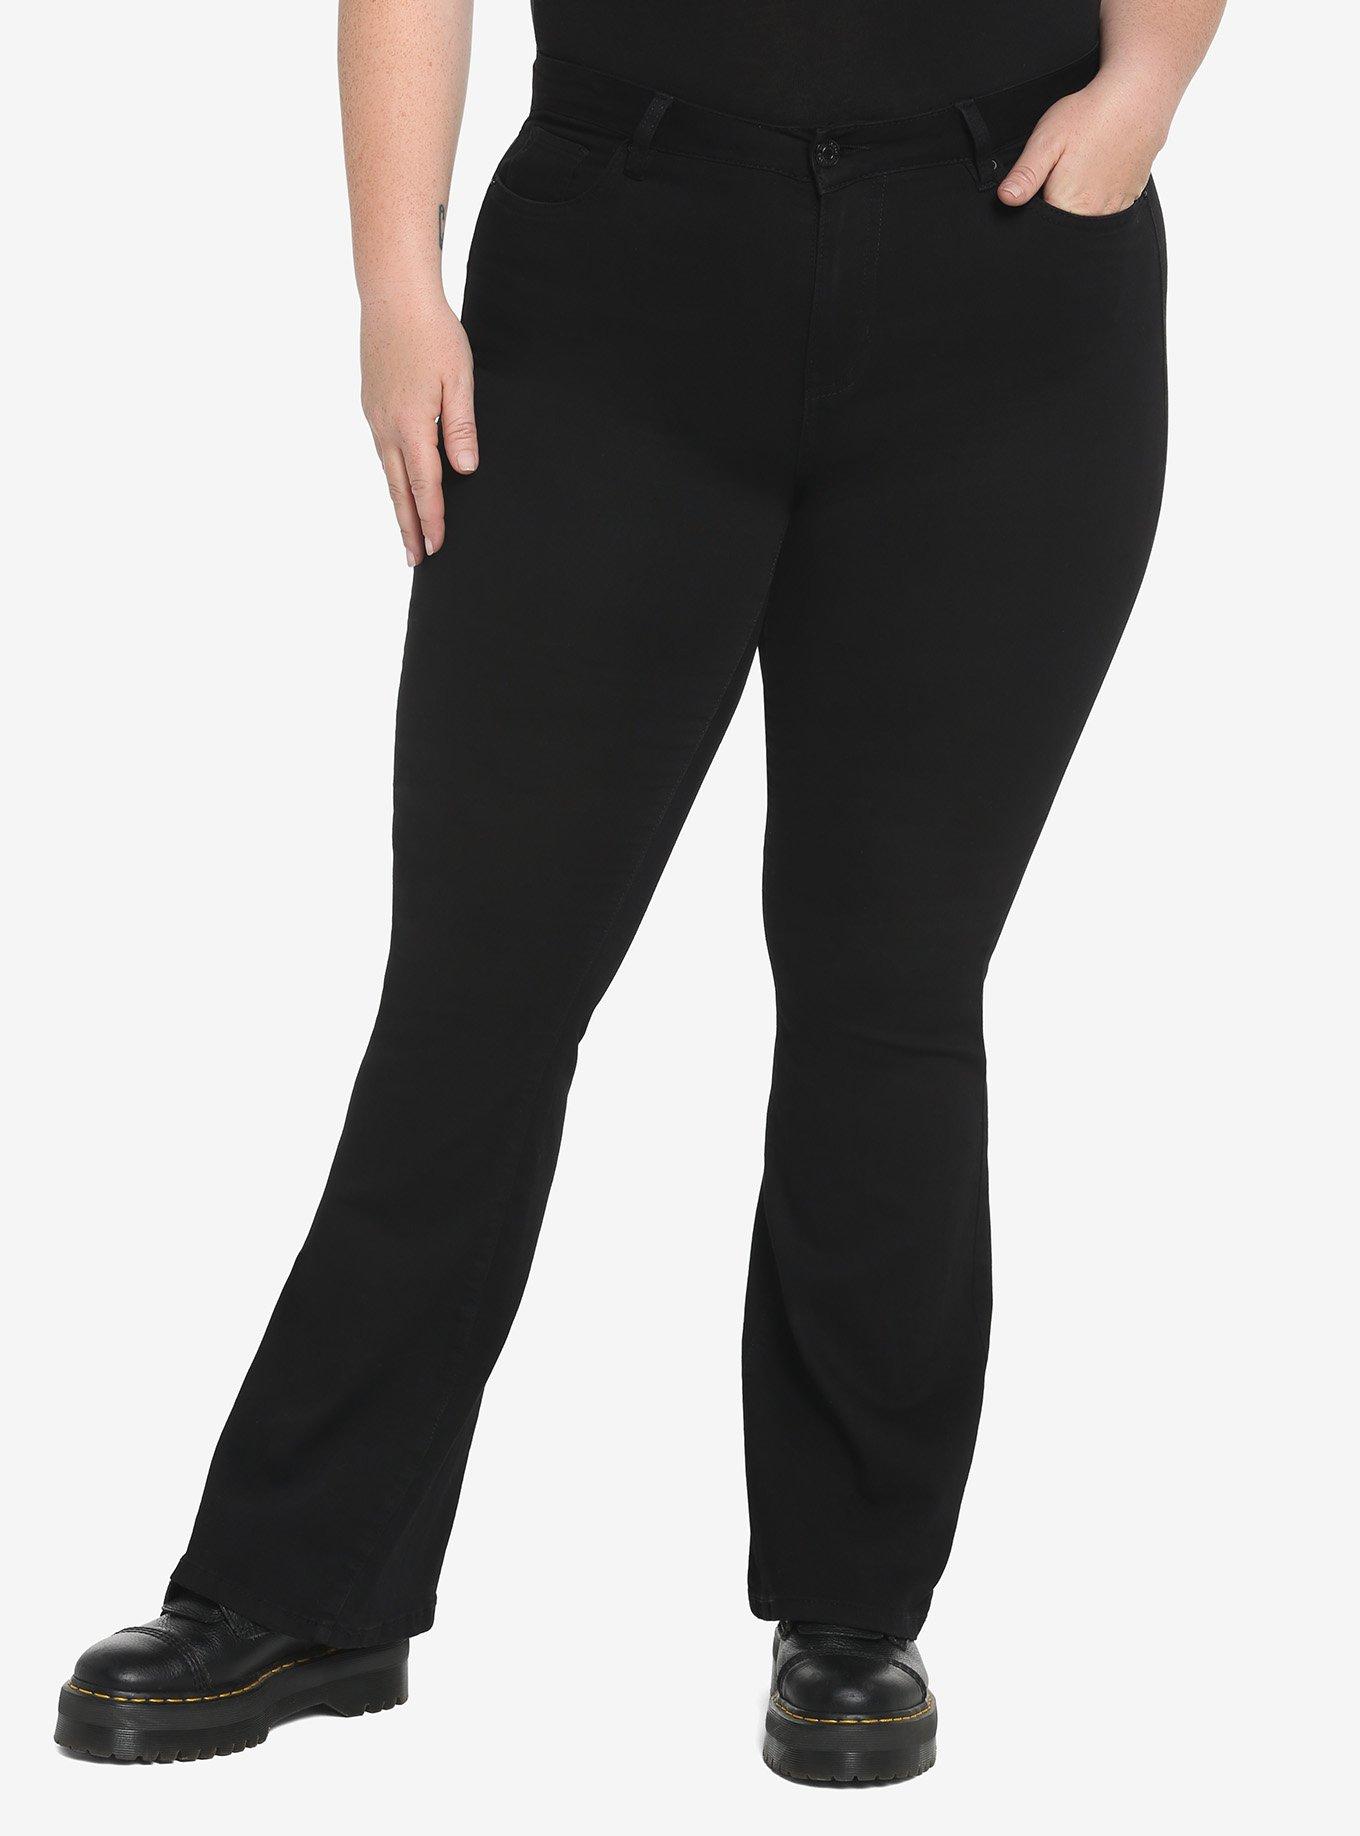 Black Stretch Flare Jeans Plus Size | Hot Topic